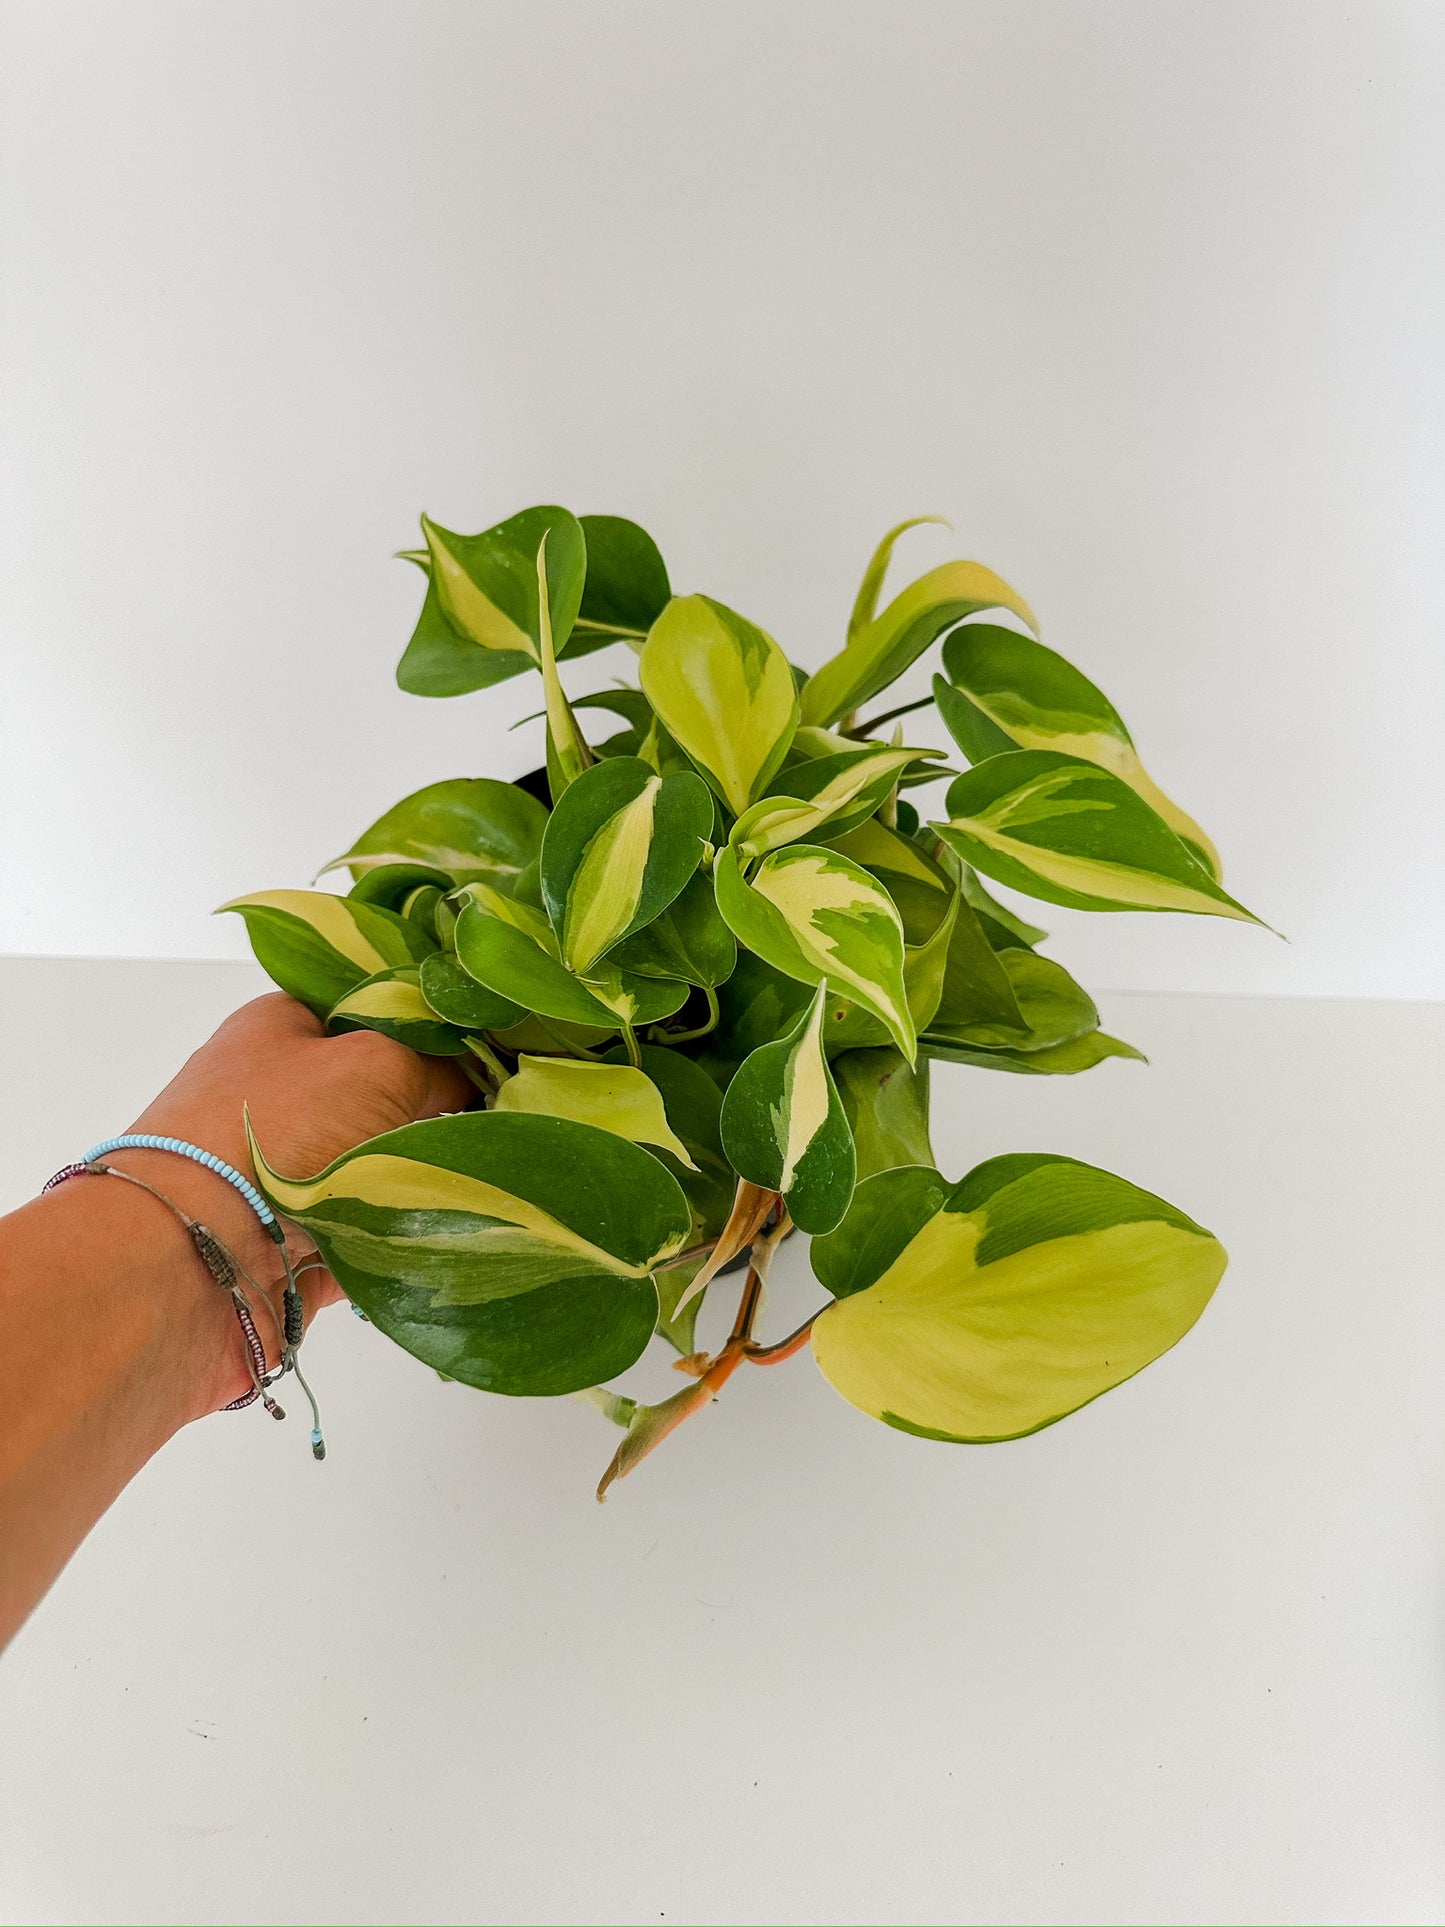 Philodendron 'Brasil'- 🌱 Beginner-Friendly, Trailing, Vibrant Colored Leaves- Tropical Houseplant- (4 Inch, 6 Inch, or 8 Inch Nursery Pot)